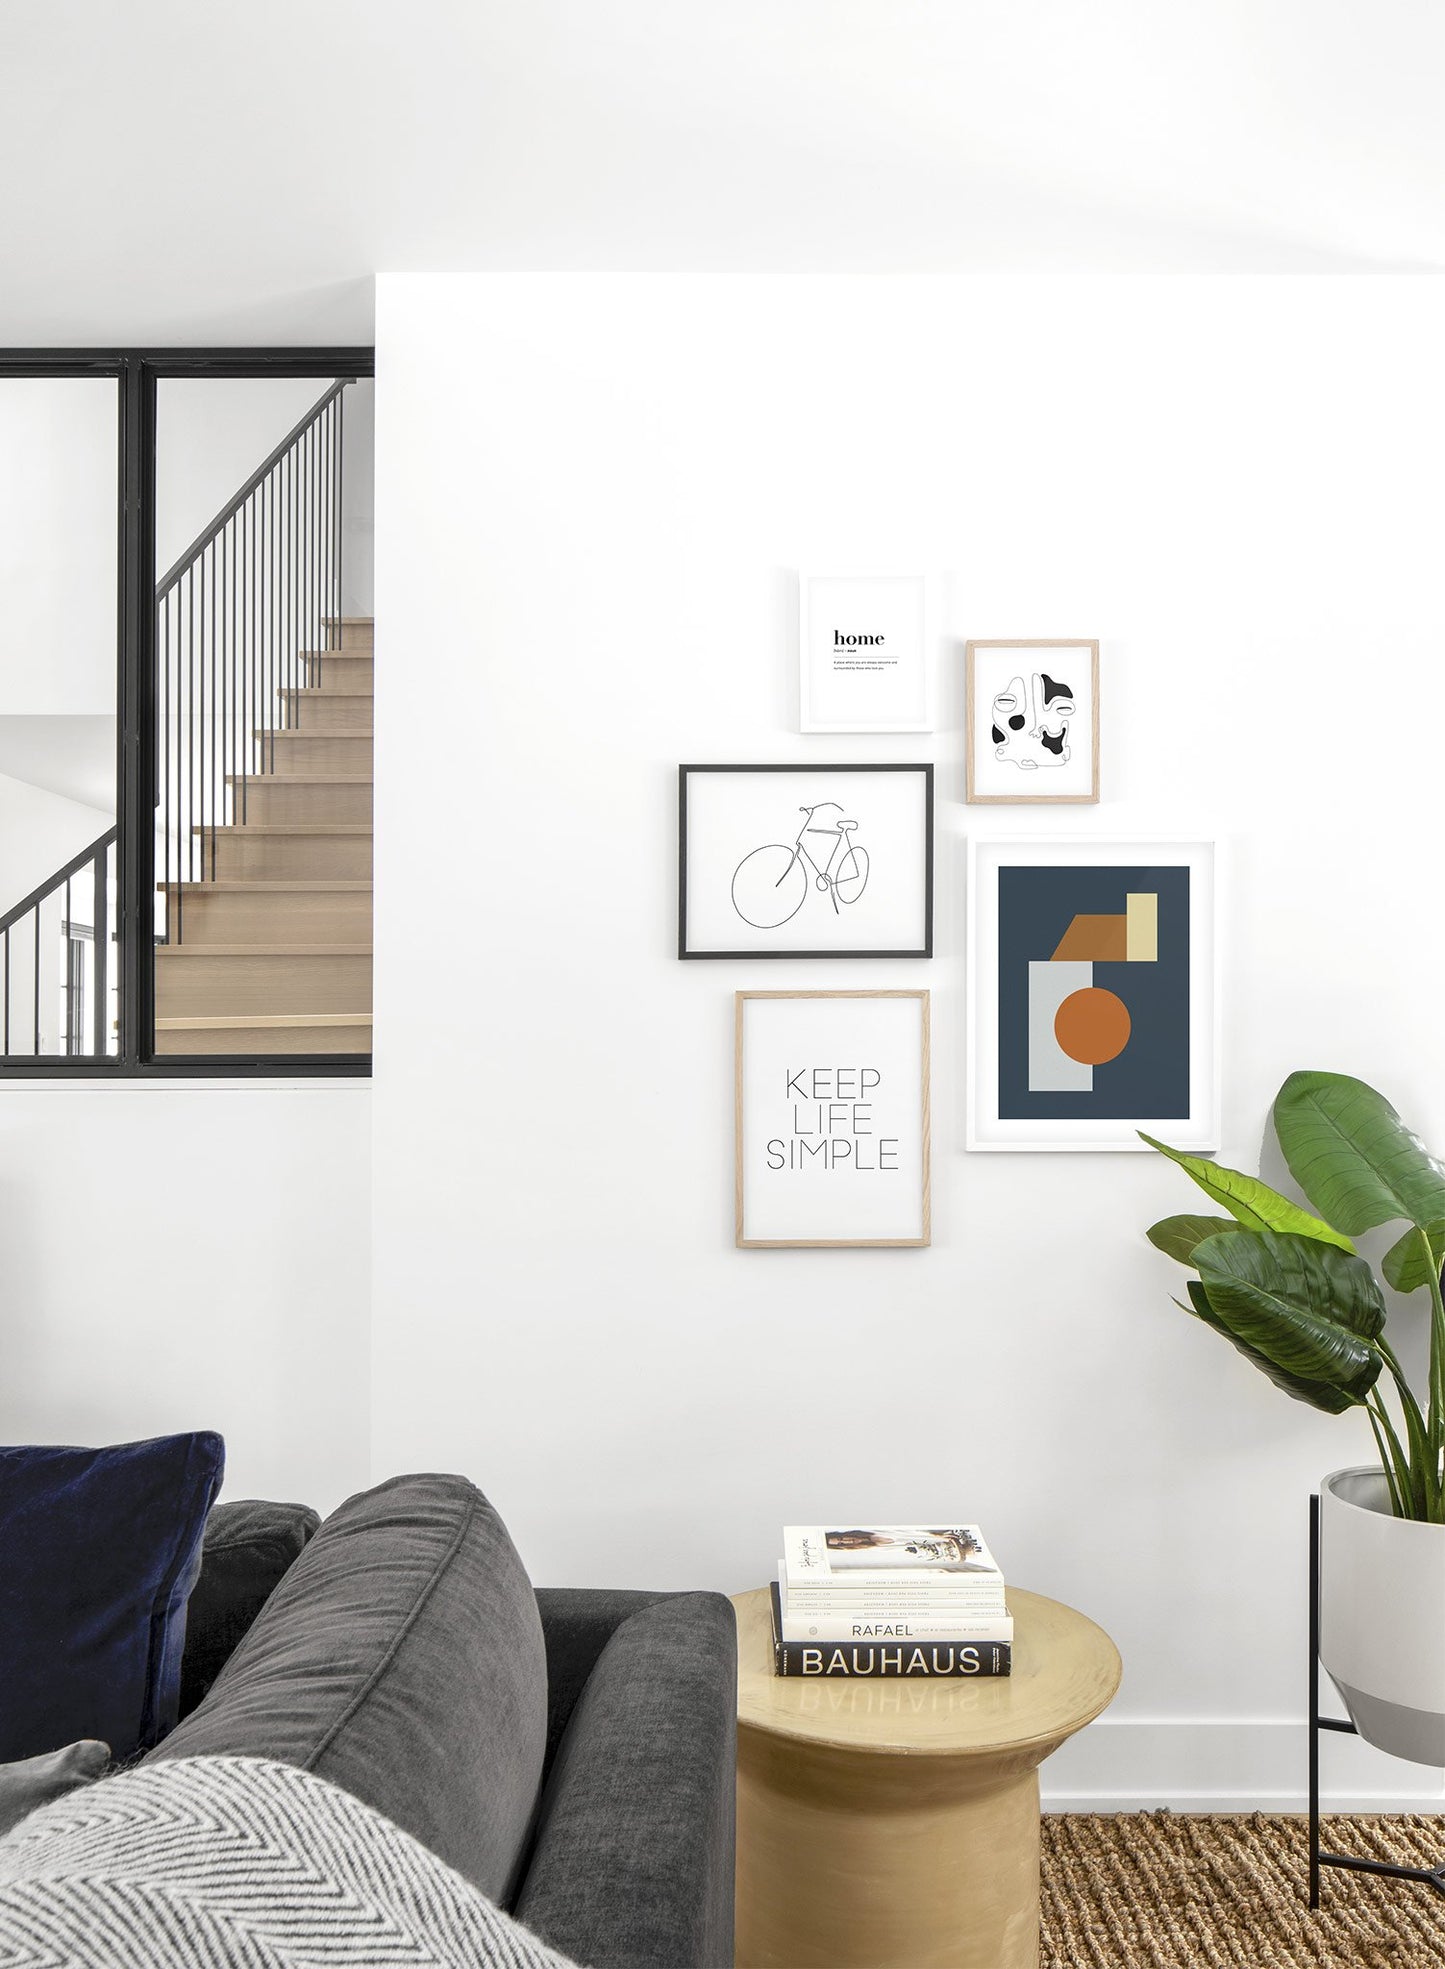 Minimalist design poster by Opposite Wall with Down Below abstract graphic design - Lifestyle Gallery - Living Room